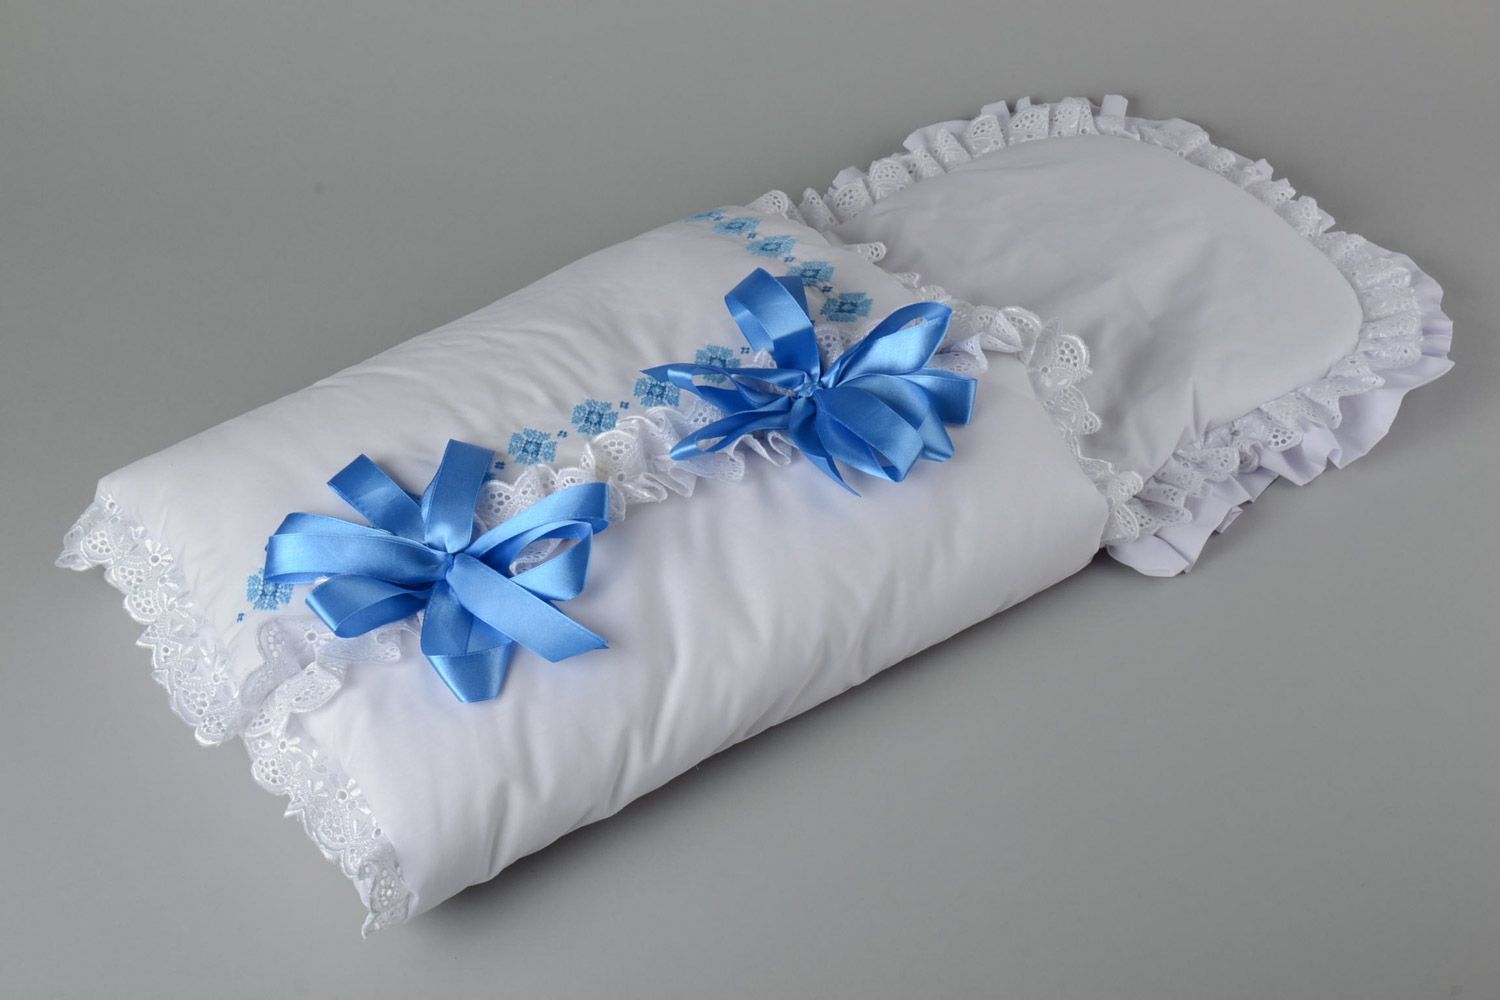 Handmade newborn blanket sewn of cotton with embroidery and blue ribbons photo 1